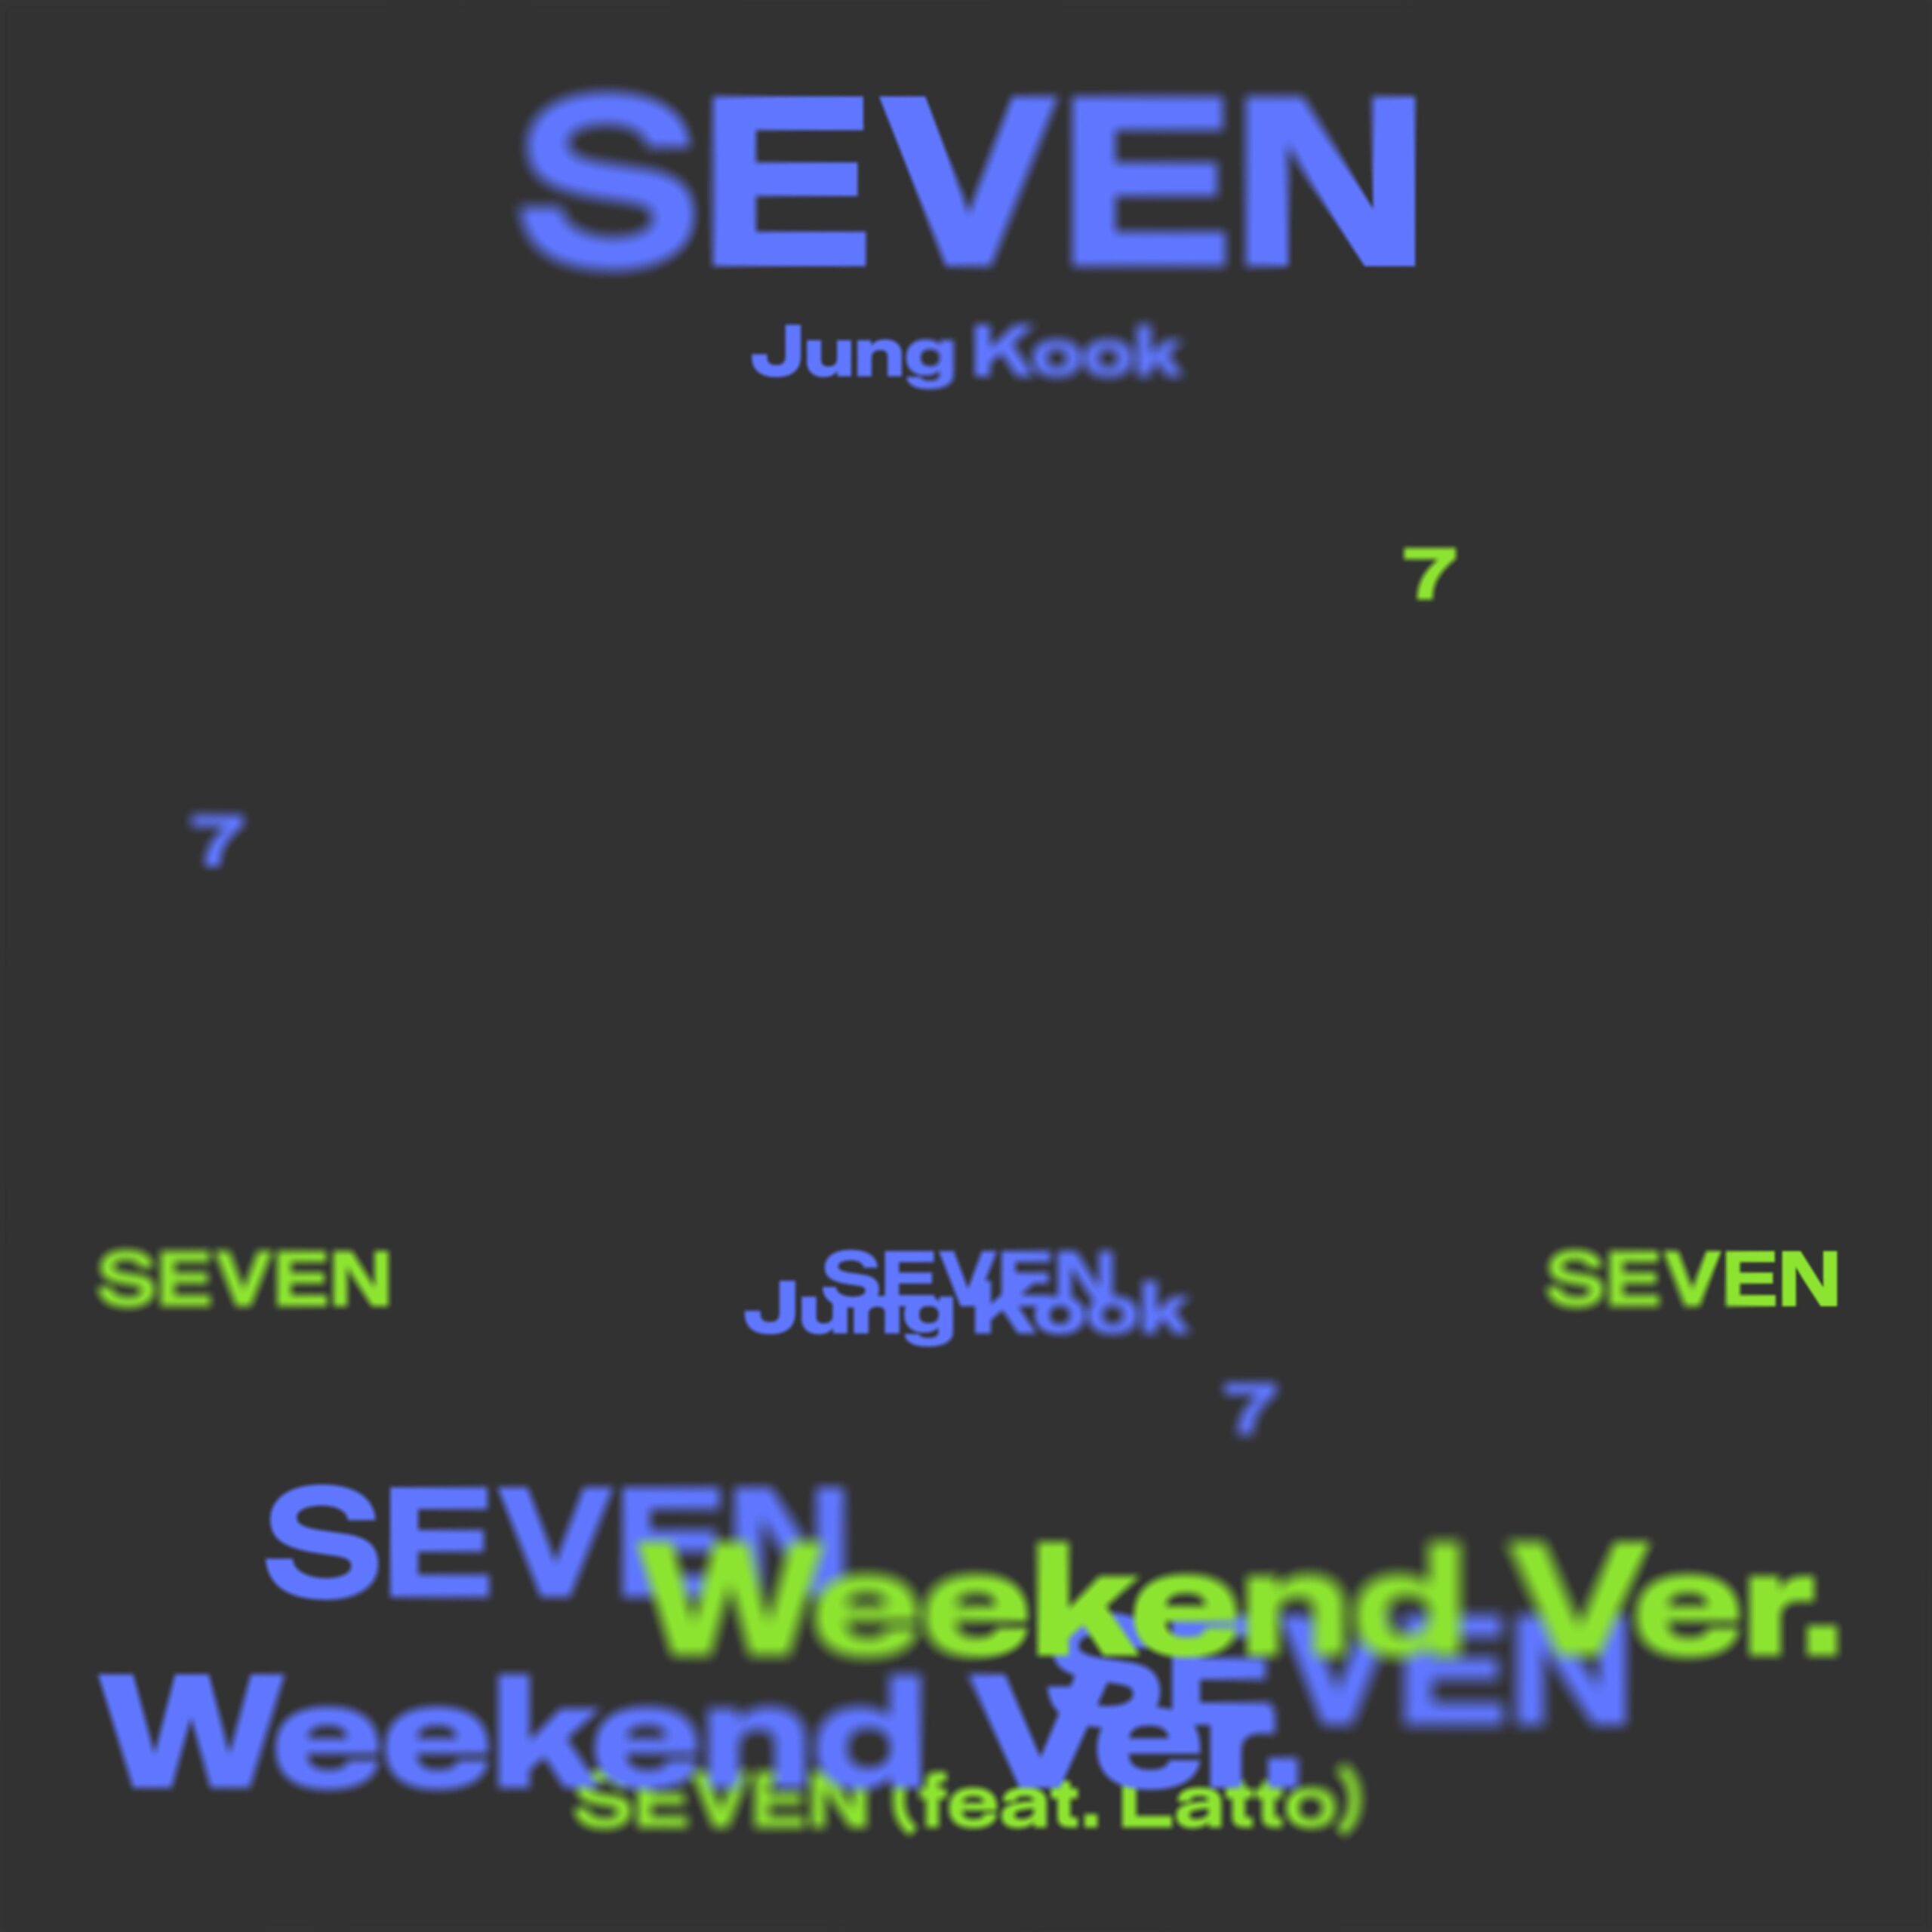 Jungkook “Seven (feat. Latto)” (Weekend Ver.) to be released 21 July - 210723